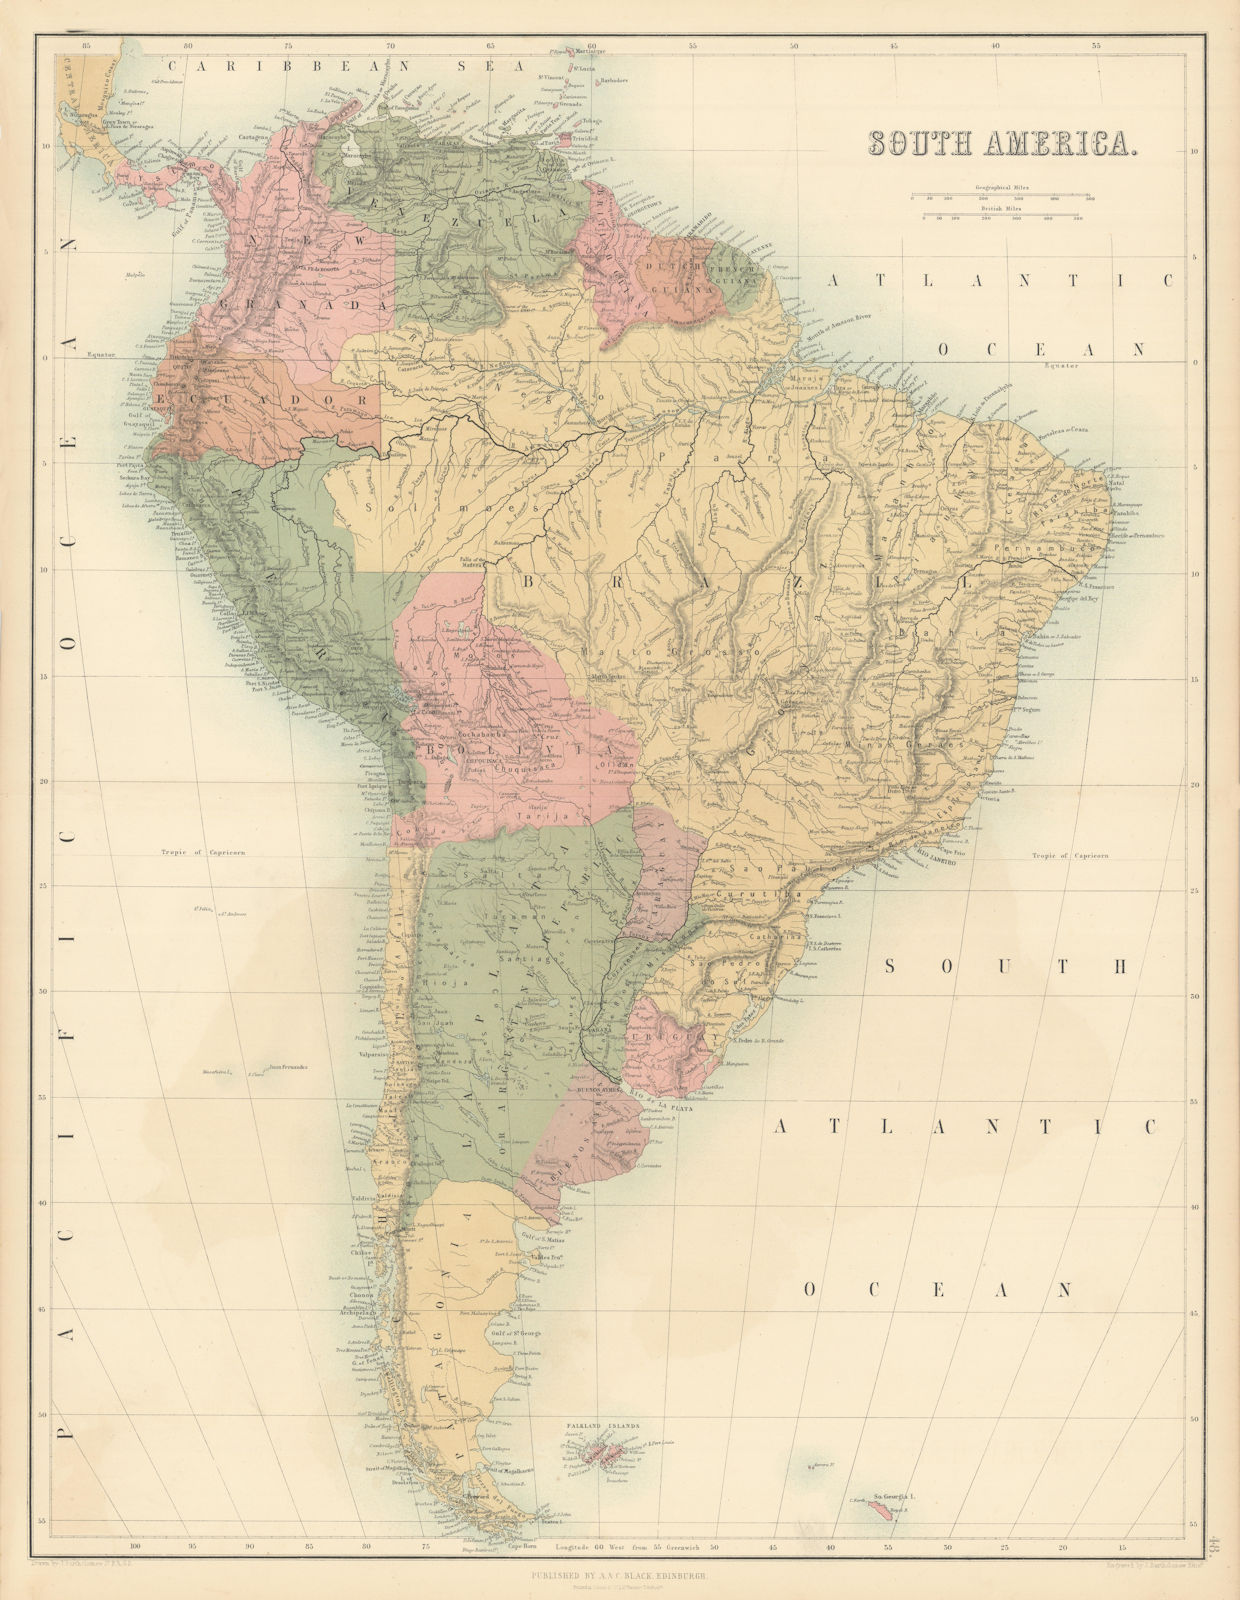 Associate Product South America. Bolivia w/ Litoral pre War of the Pacific. BARTHOLOMEW 1862 map